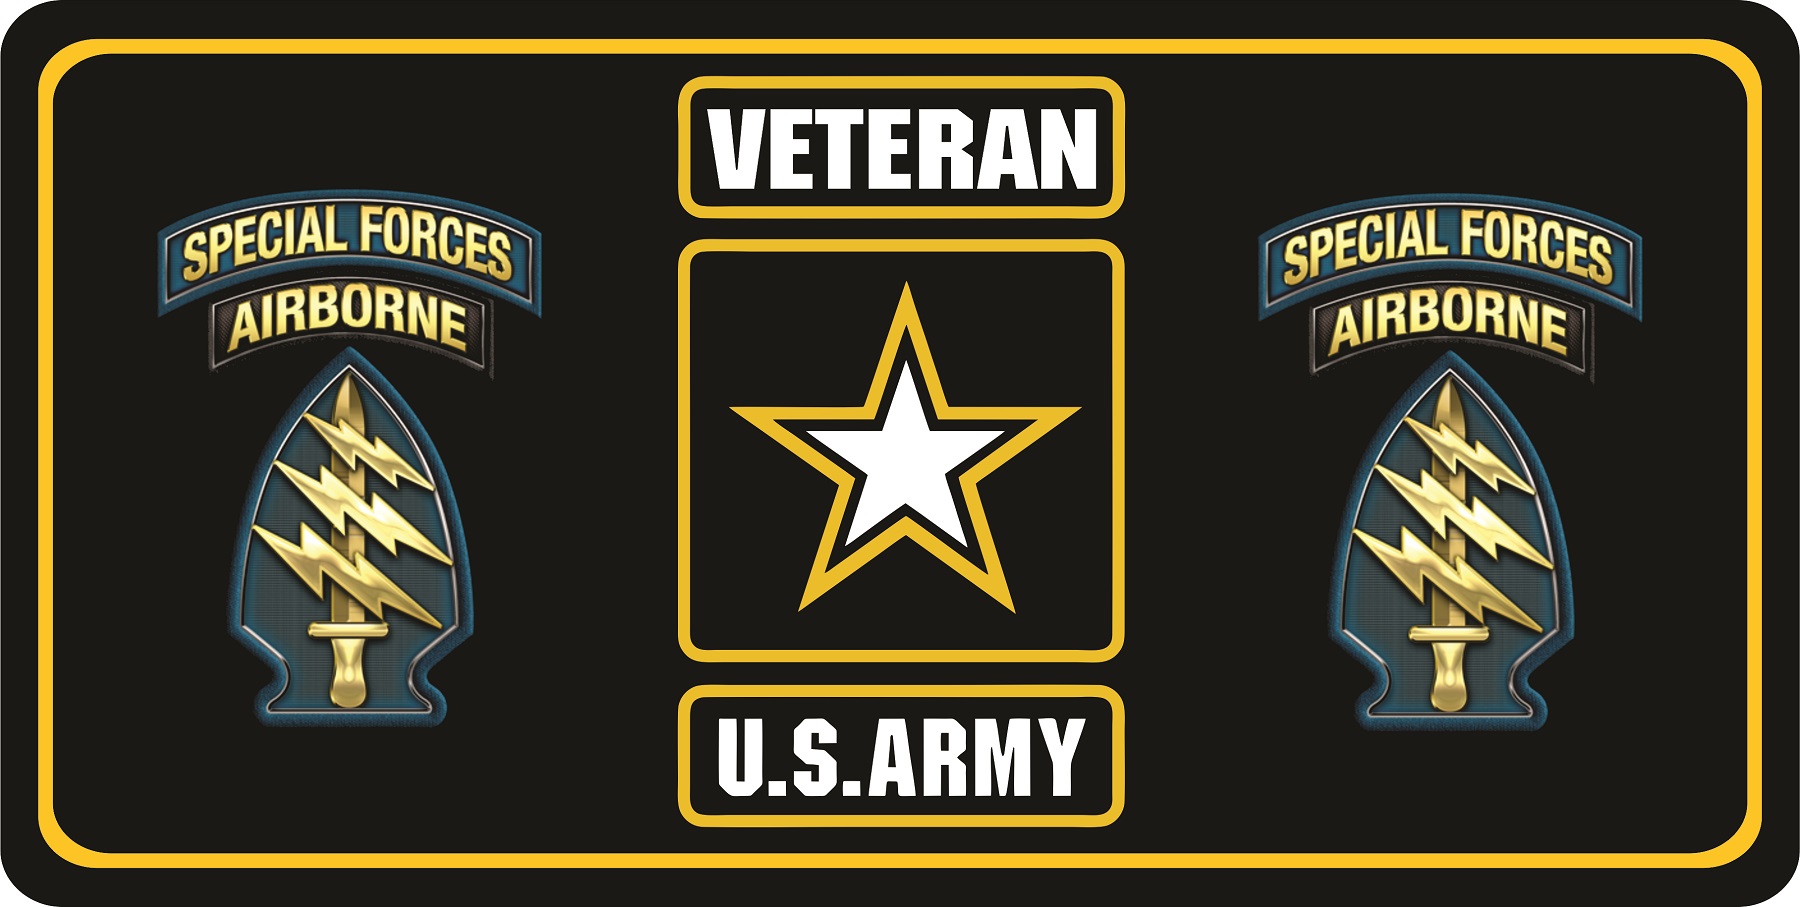 U.S. Army Veteran Special Forces #2 Photo LICENSE PLATE